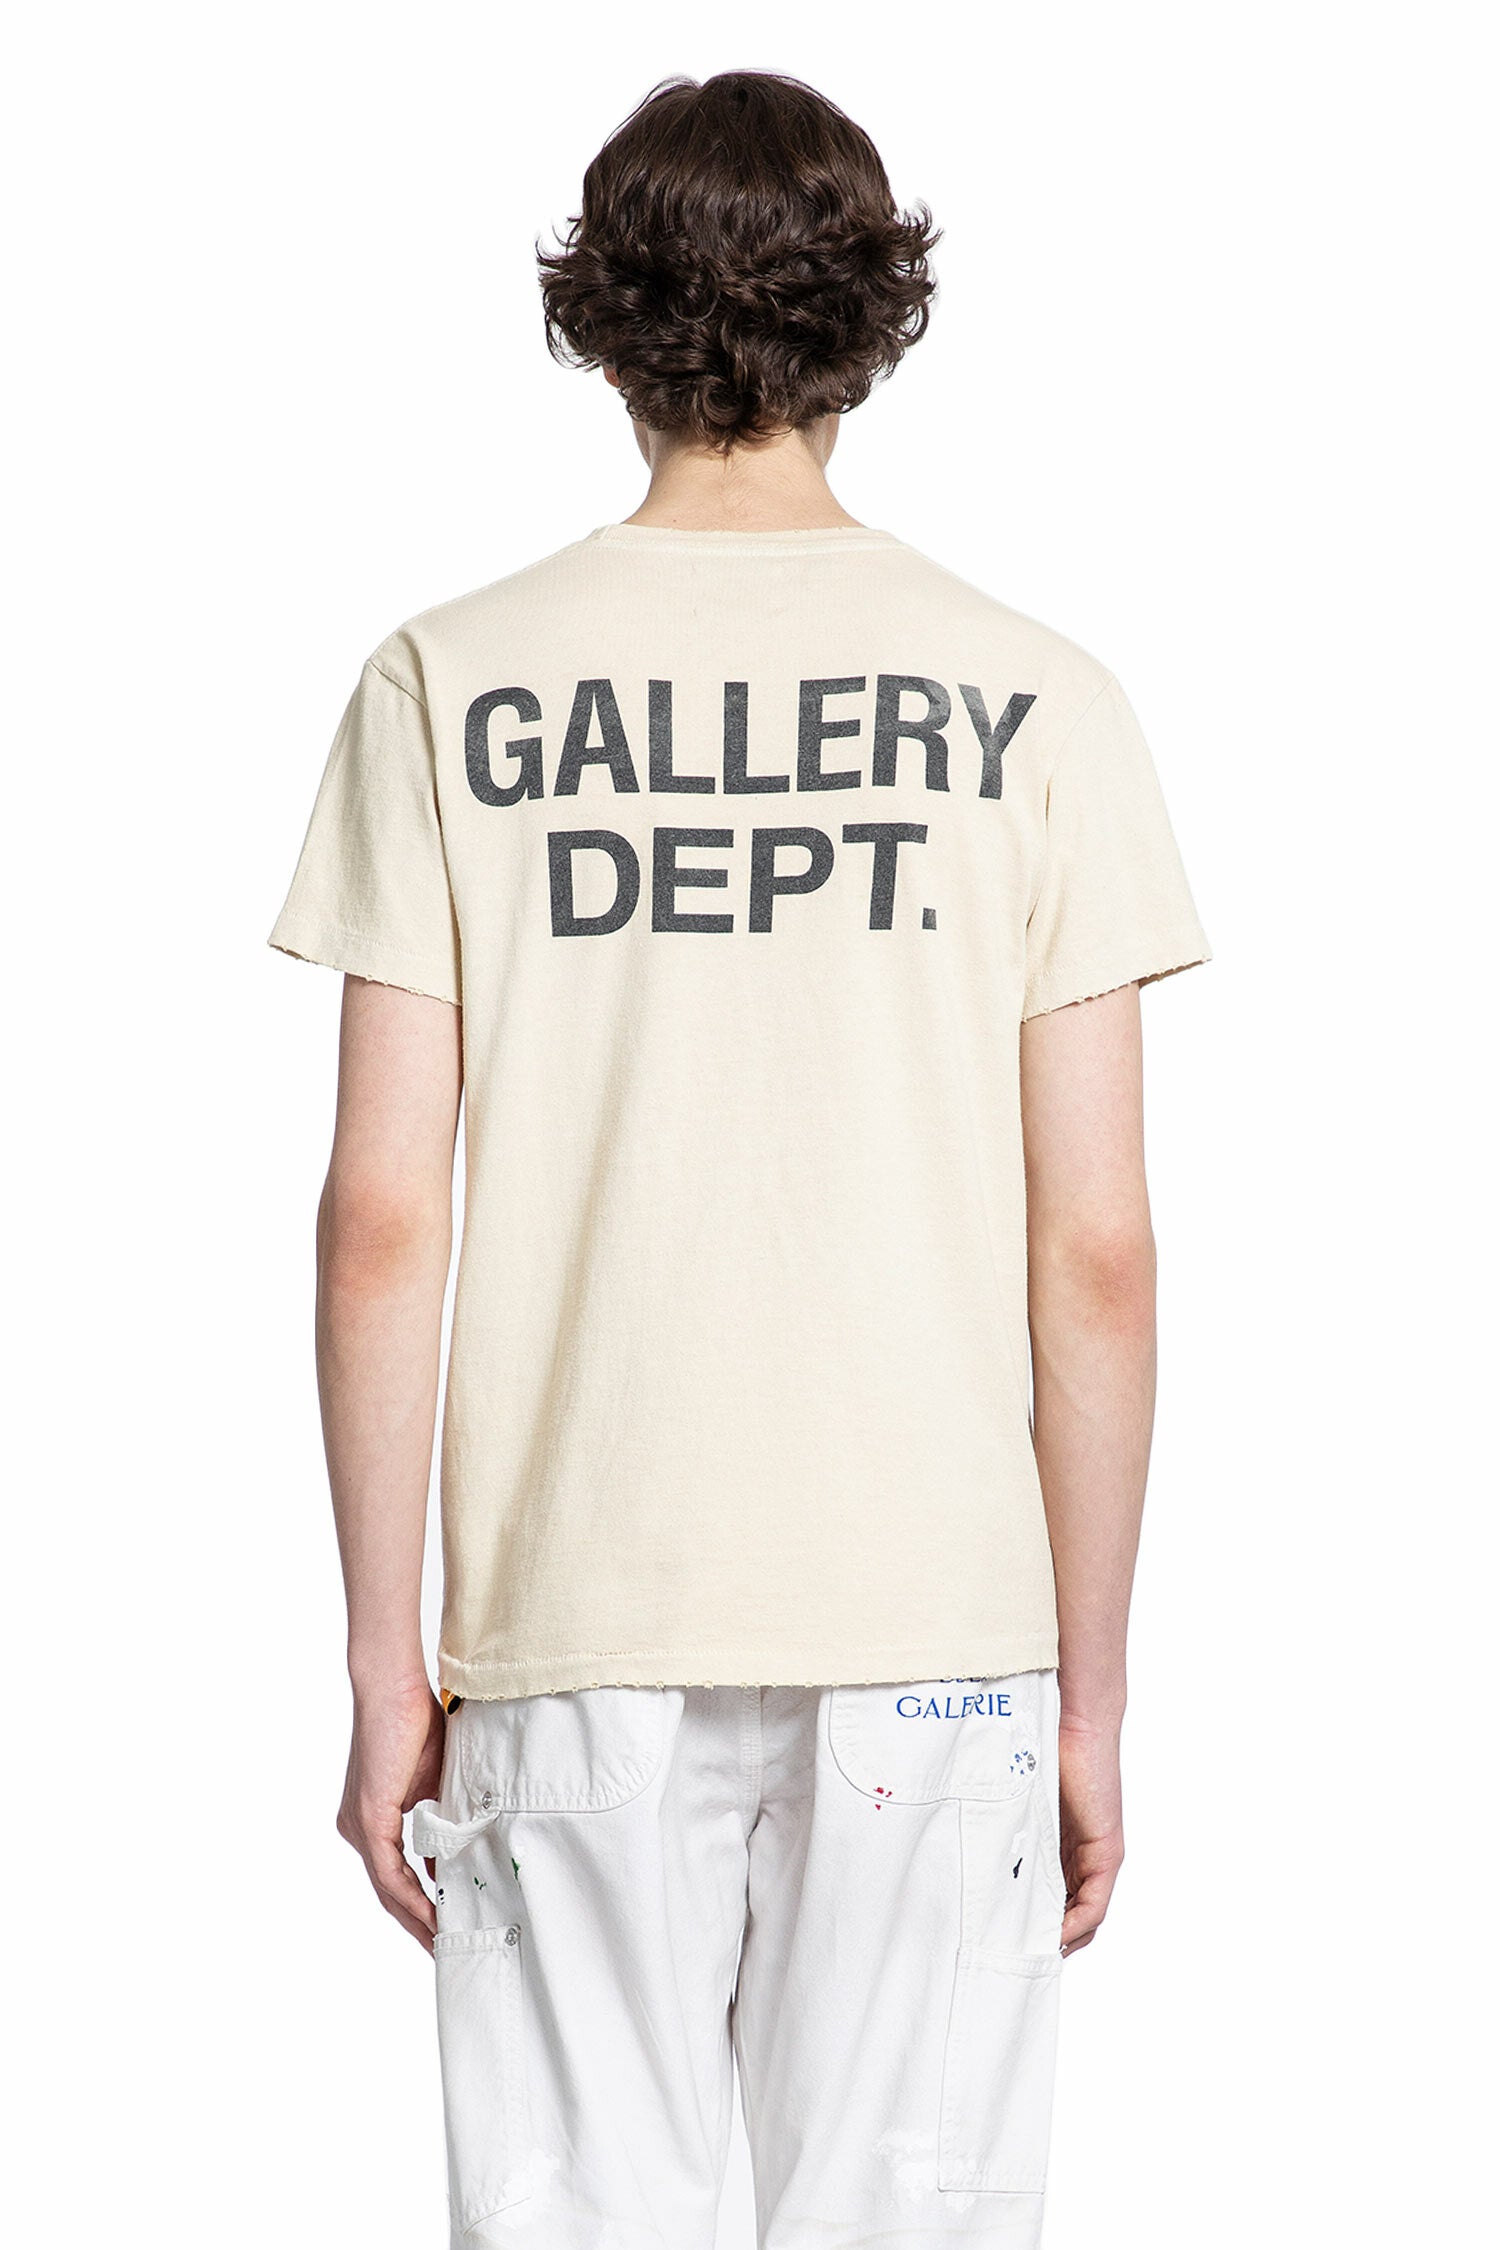 GALLERY DEPT. MAN OFF-WHITE T-SHIRTS & TANK TOPS